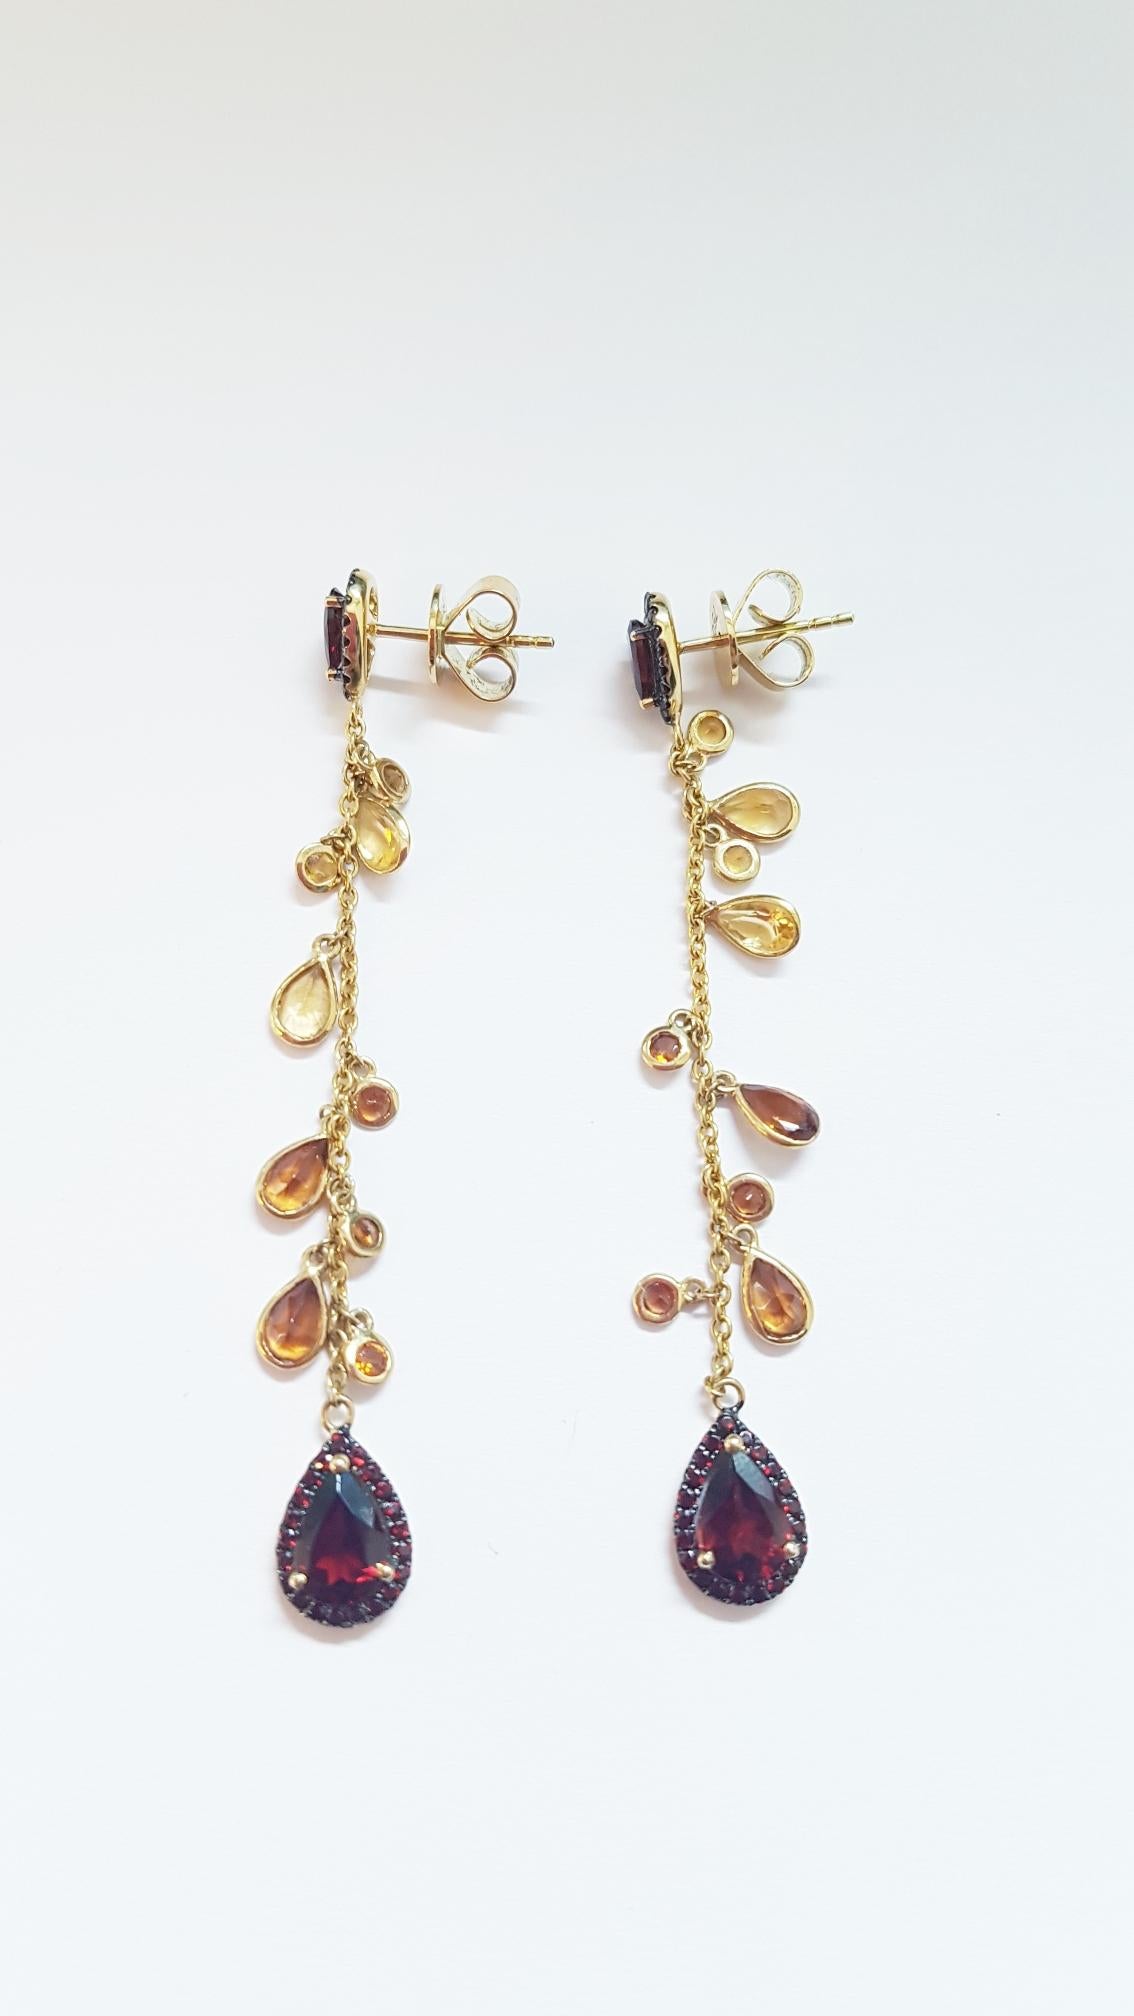 A really nice pair of earrings from our collection EVANUEVA.
It's made up of small cabouchons in red garnet, small drops in citrine and hessonite and 18kt yellow gold. Pierce and post system. 
Yellow Gold g. 4,16
Stones ct. 4,93